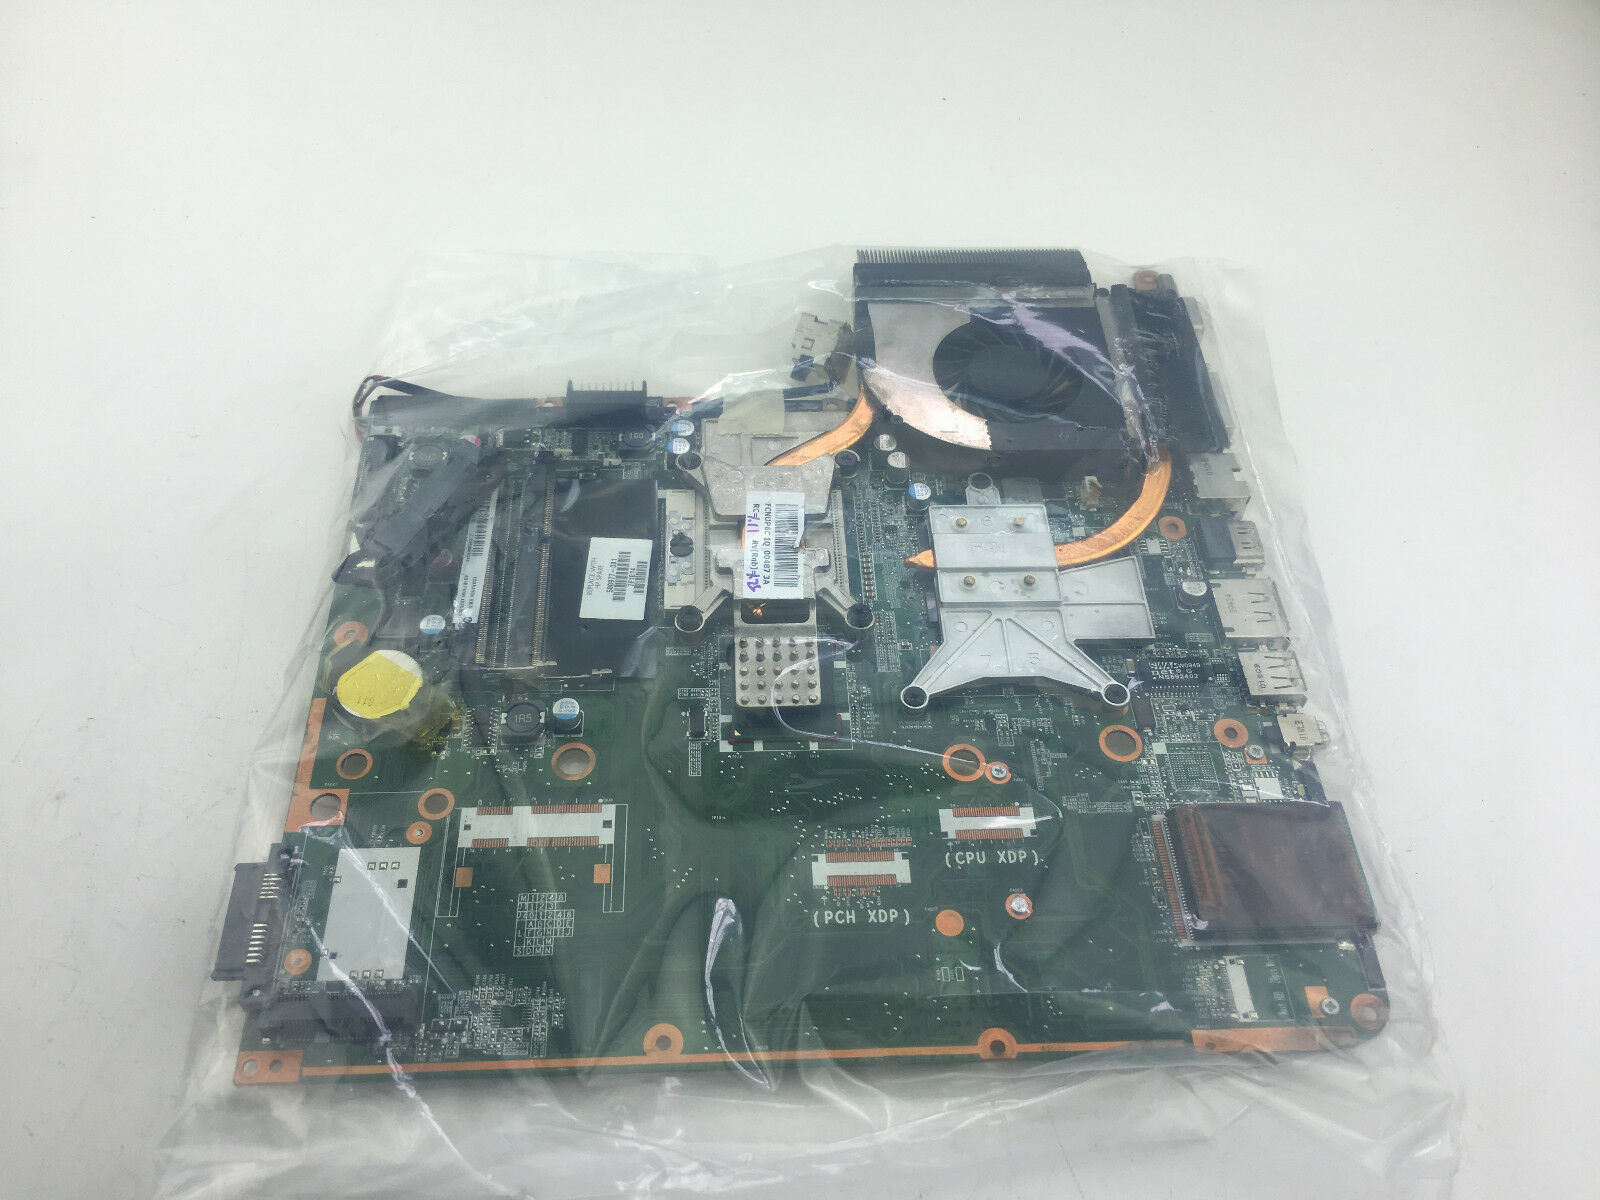 580977-001 Intel/Nvidia Motherboard for HP DV6-2100 Laptop, PM55, i3 i5 only, A Compatible CPU Brand: Intel